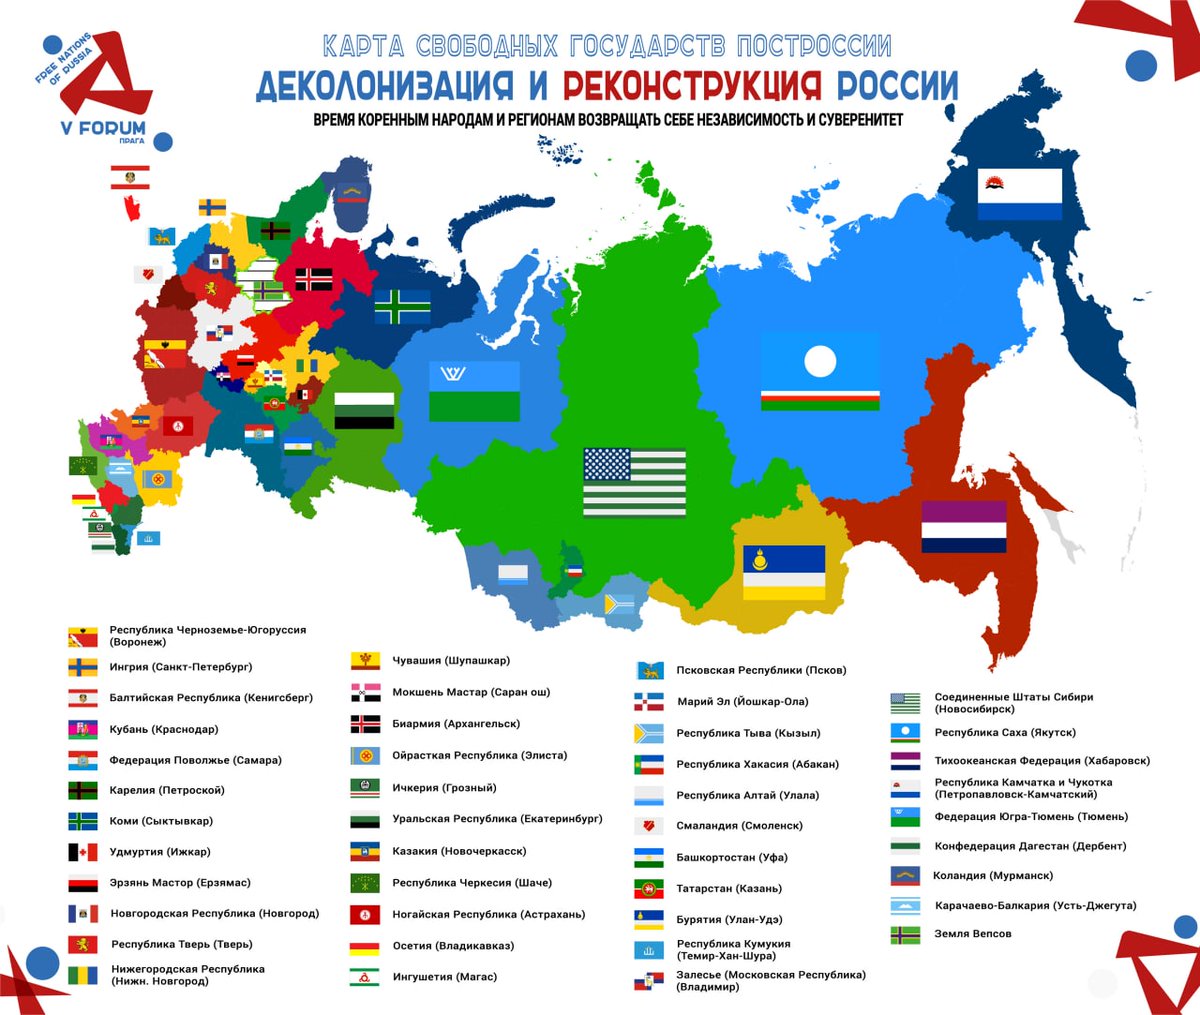 Are You ready for #PostRussia?🎯
41 New Independent States of #PostRussianSpaces by full #DecolonizationRF - last colonial empire(#Moscovia, so-called 'Russian  Federation') in #Europe is coming ✌
Freedom for #CaptiveNations & Regions - let's do it together!🔥